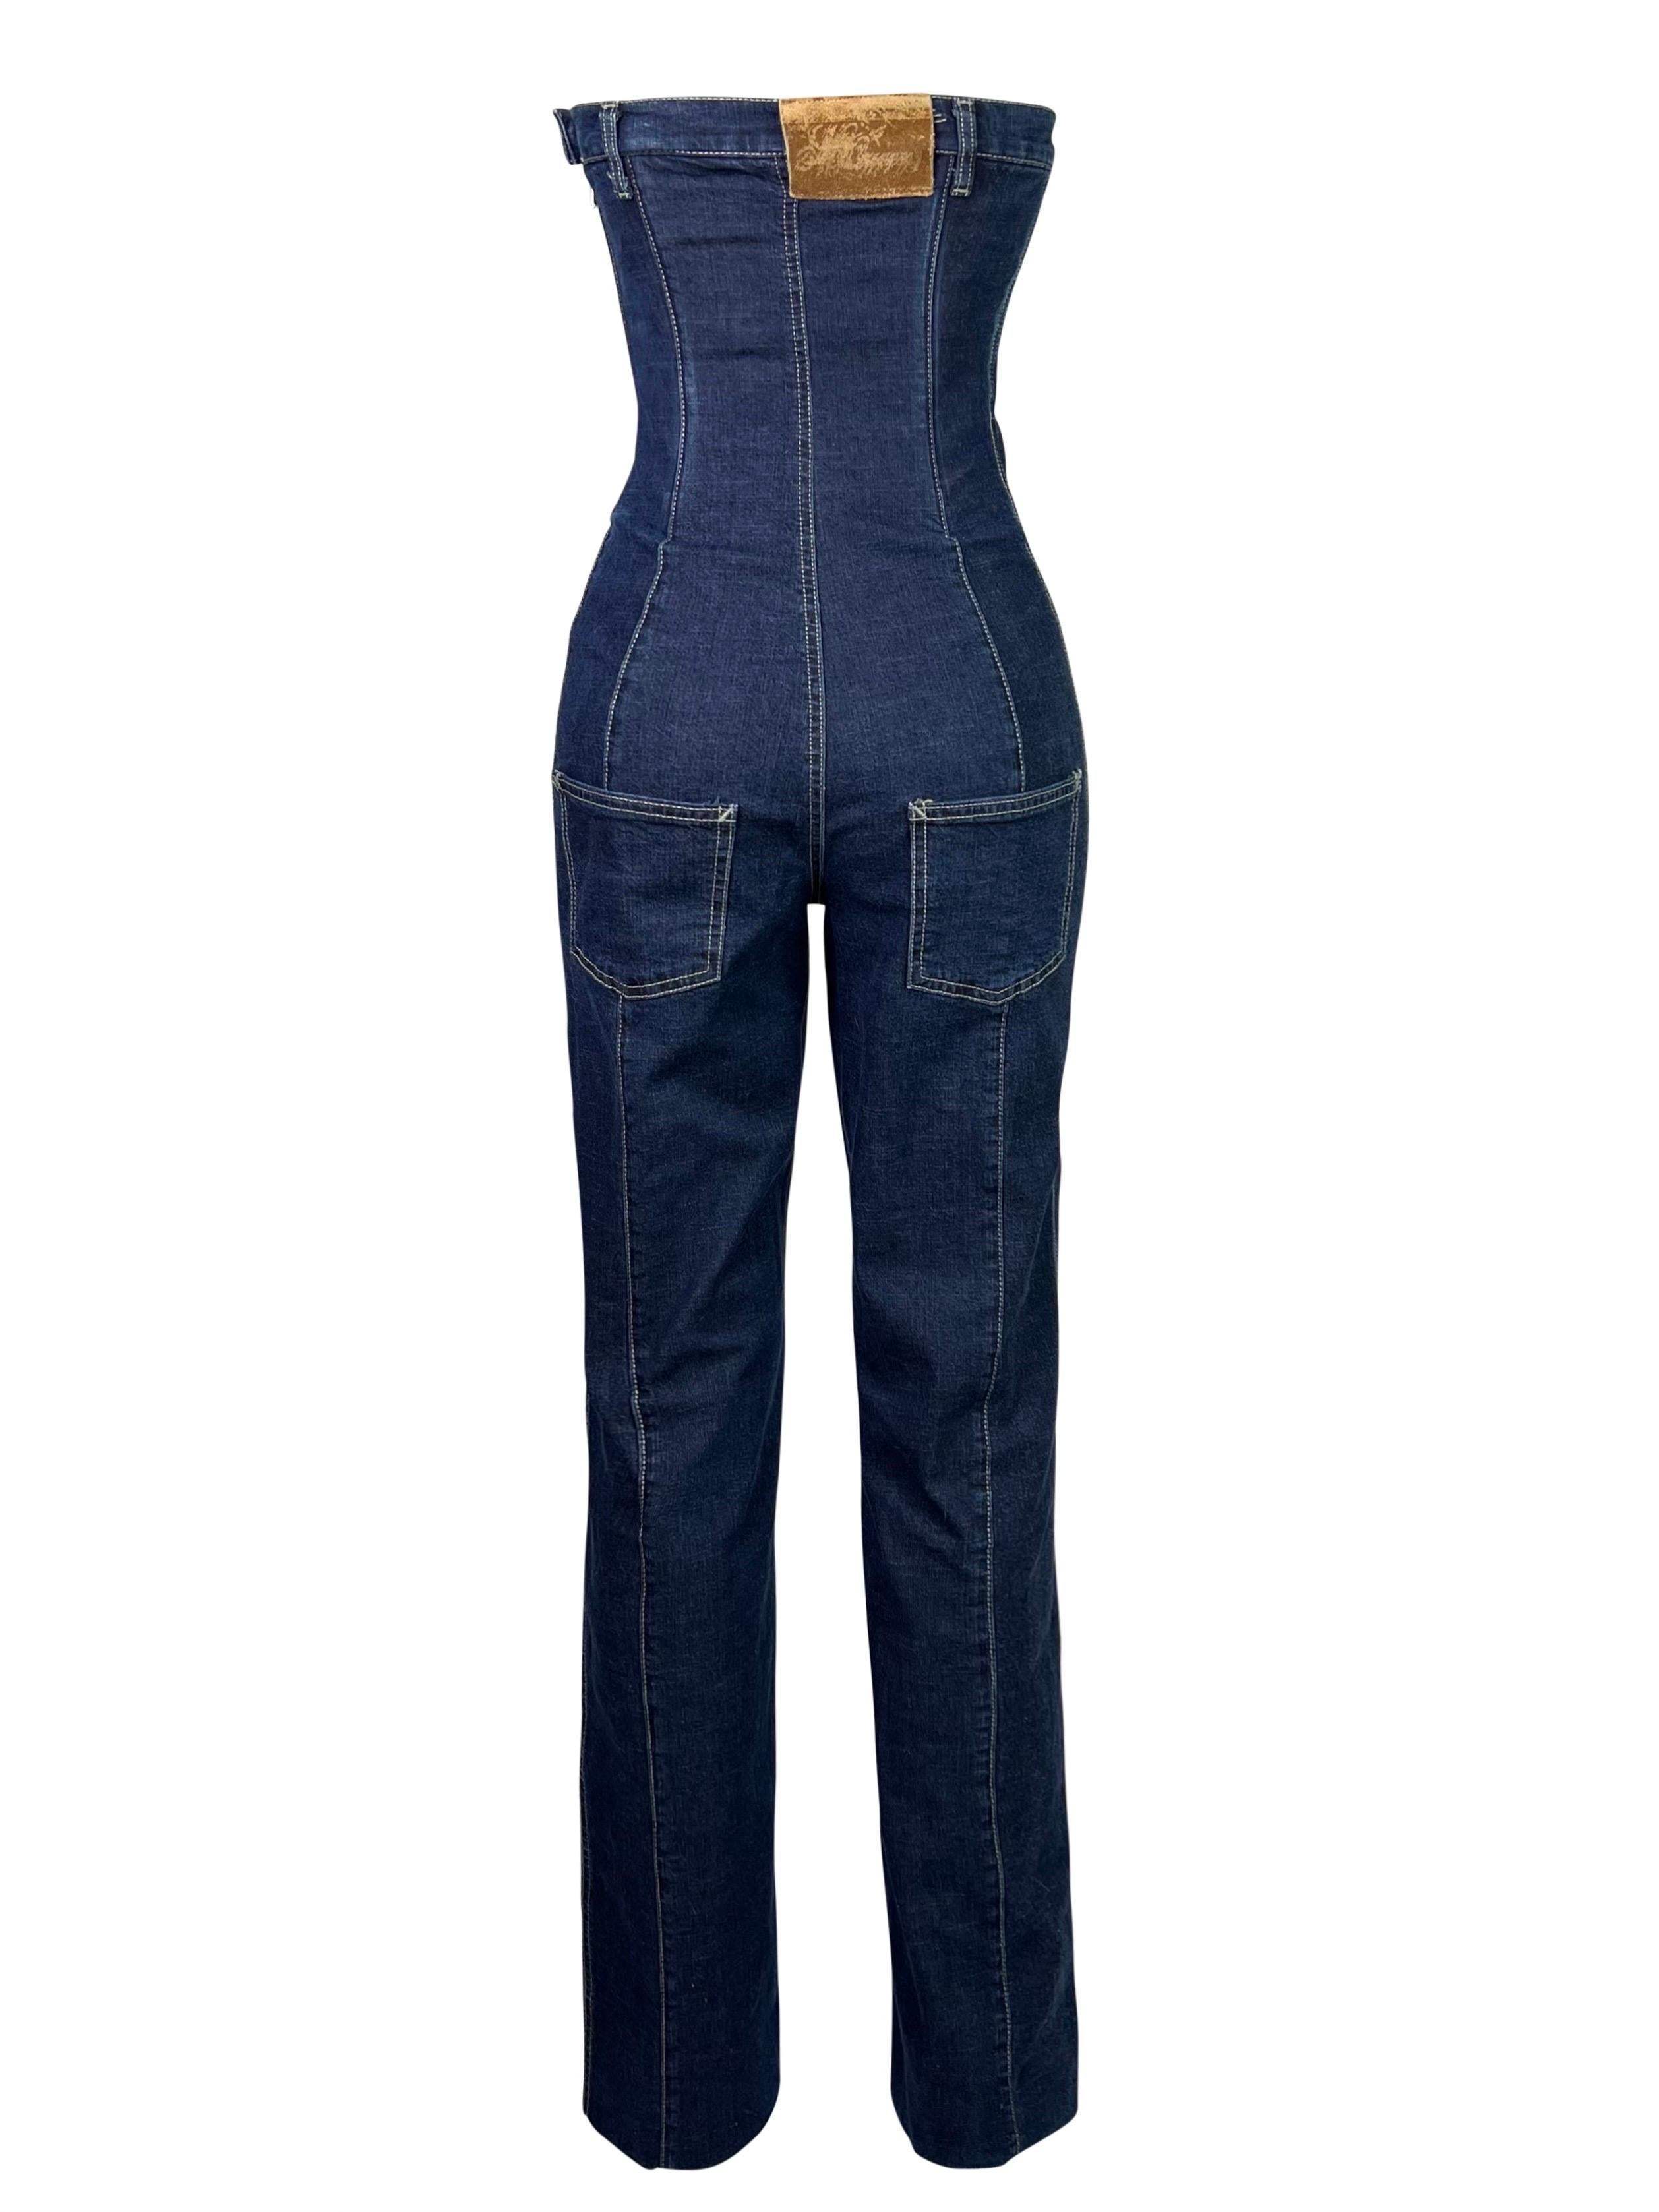 An absolute rarity from Alexander McQueen's one of the most prominent collections. 

This stunning denim jumpsuit has an integrated corset which gives its wearer a very flattering silhouette. 

Missing composition/size label, but fit corresponds to